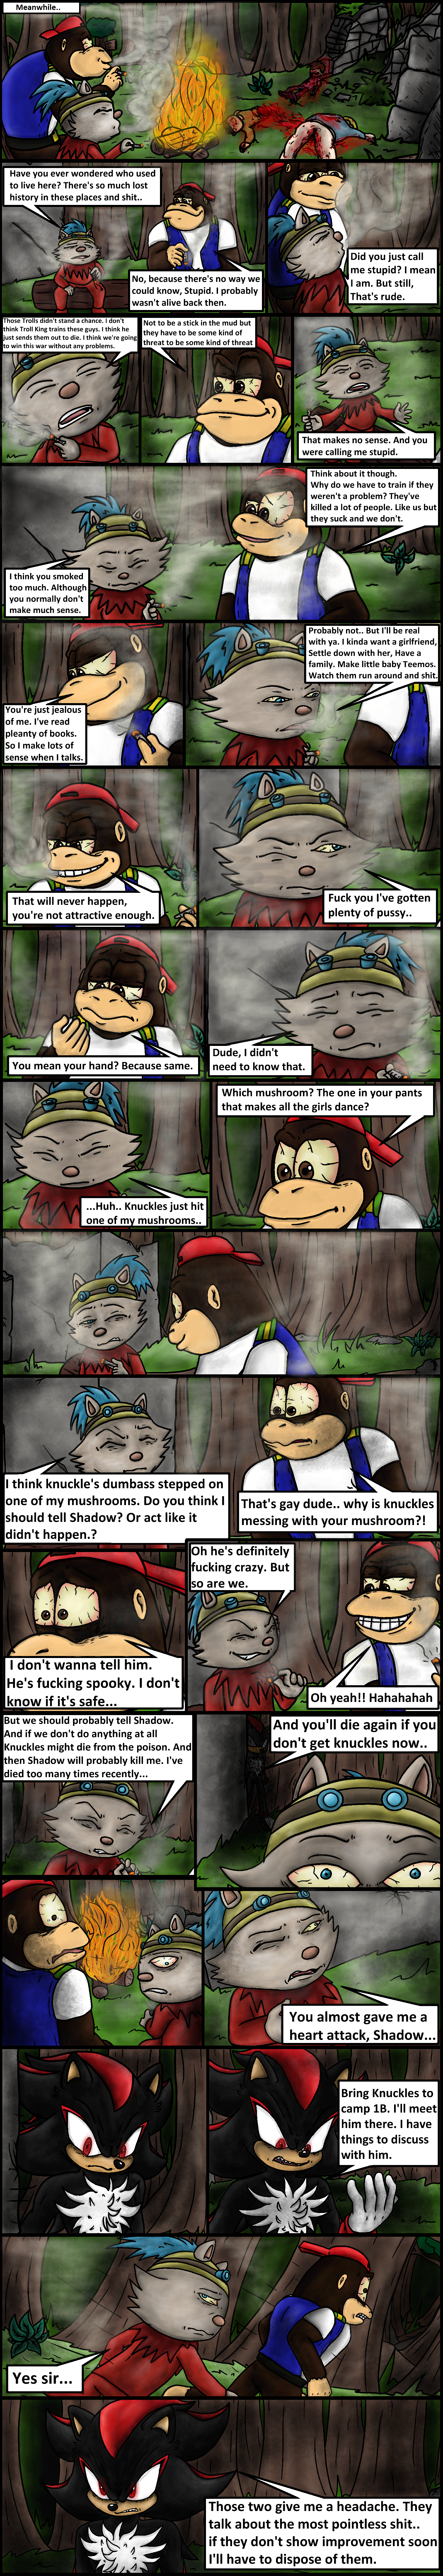 ch26/pg23.png. If you're seeing this, enable images. If you have them enabled, email commodorian@tailsgetstrolled.org with a detailed description of how you got here. (Screenshots help!)